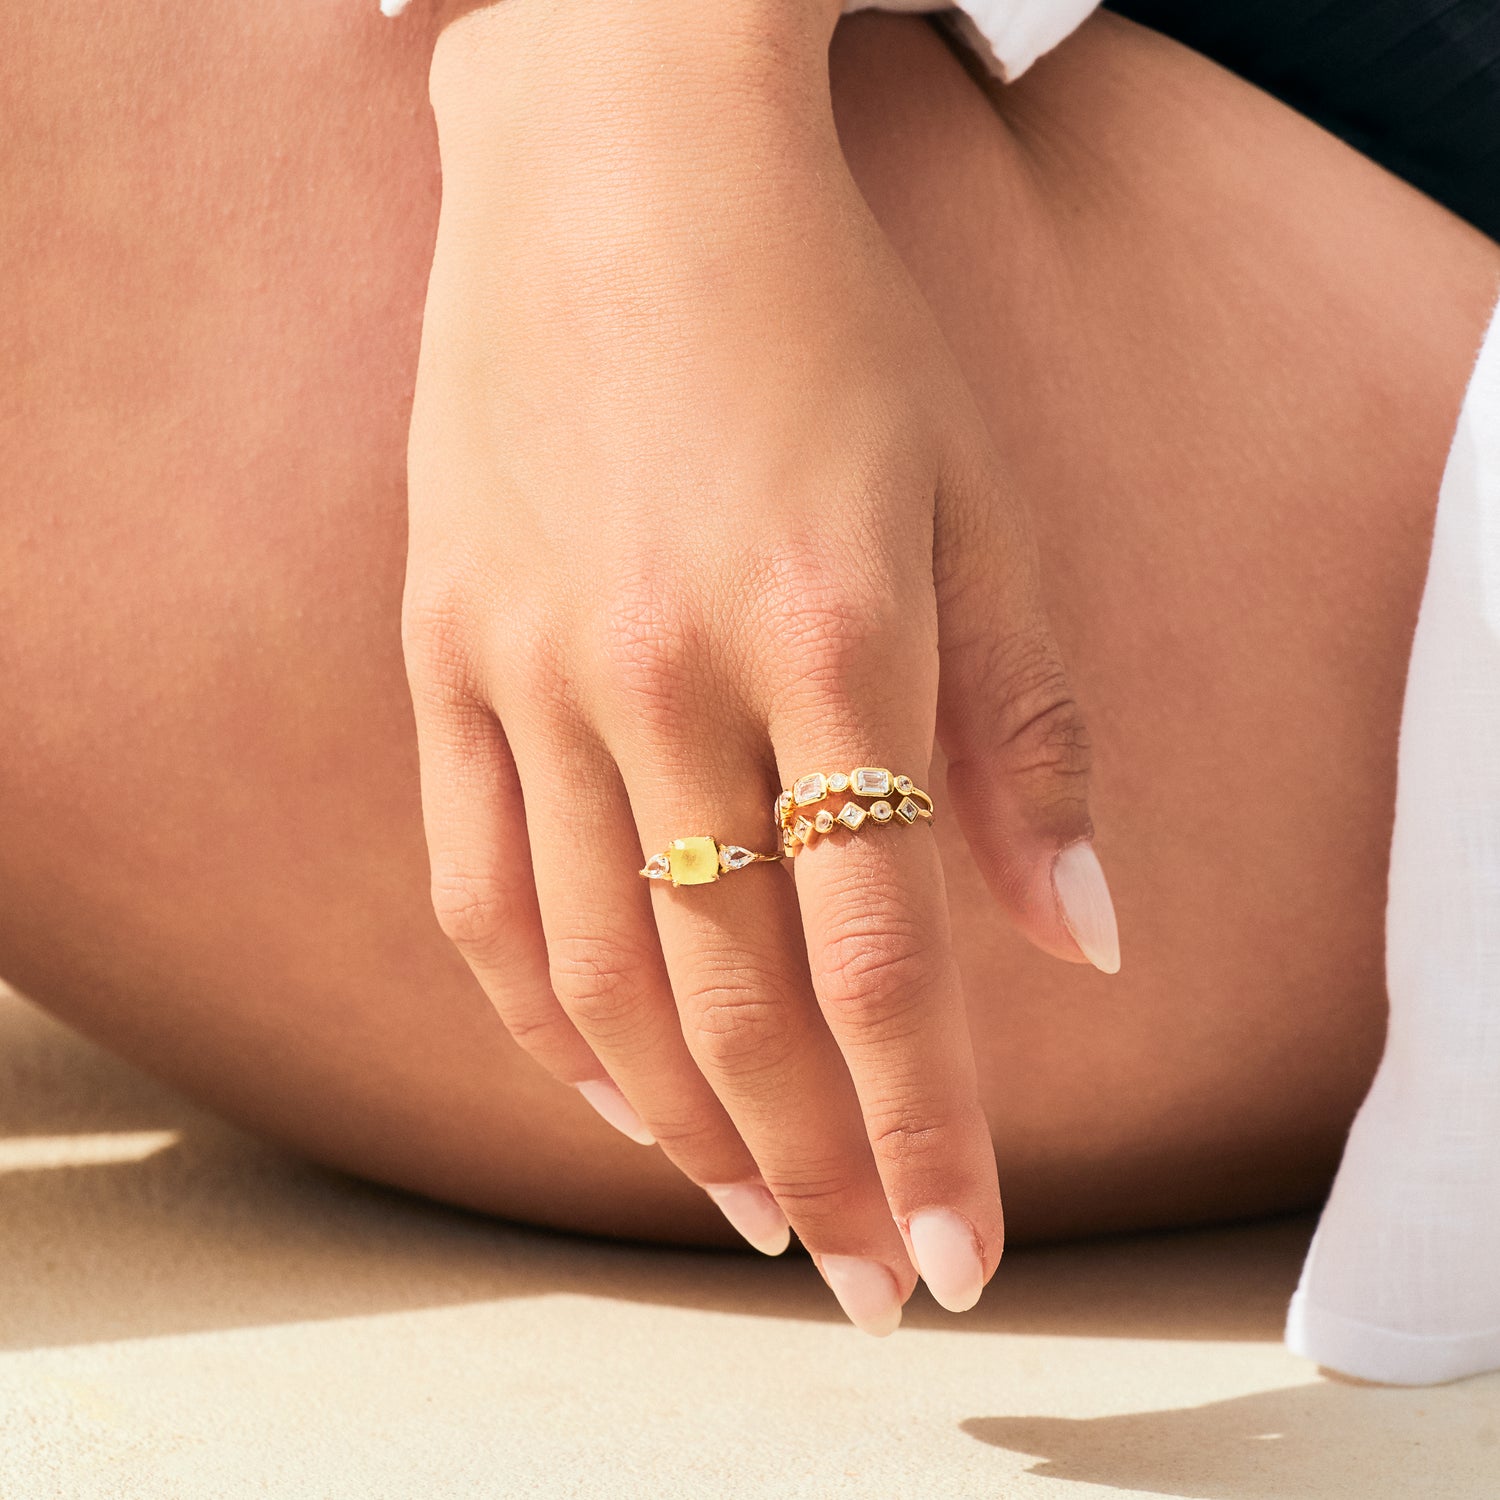 Gaia Yellow Sapphire Ring In Gold Vermeil - Ring - Carrie Elizabeth